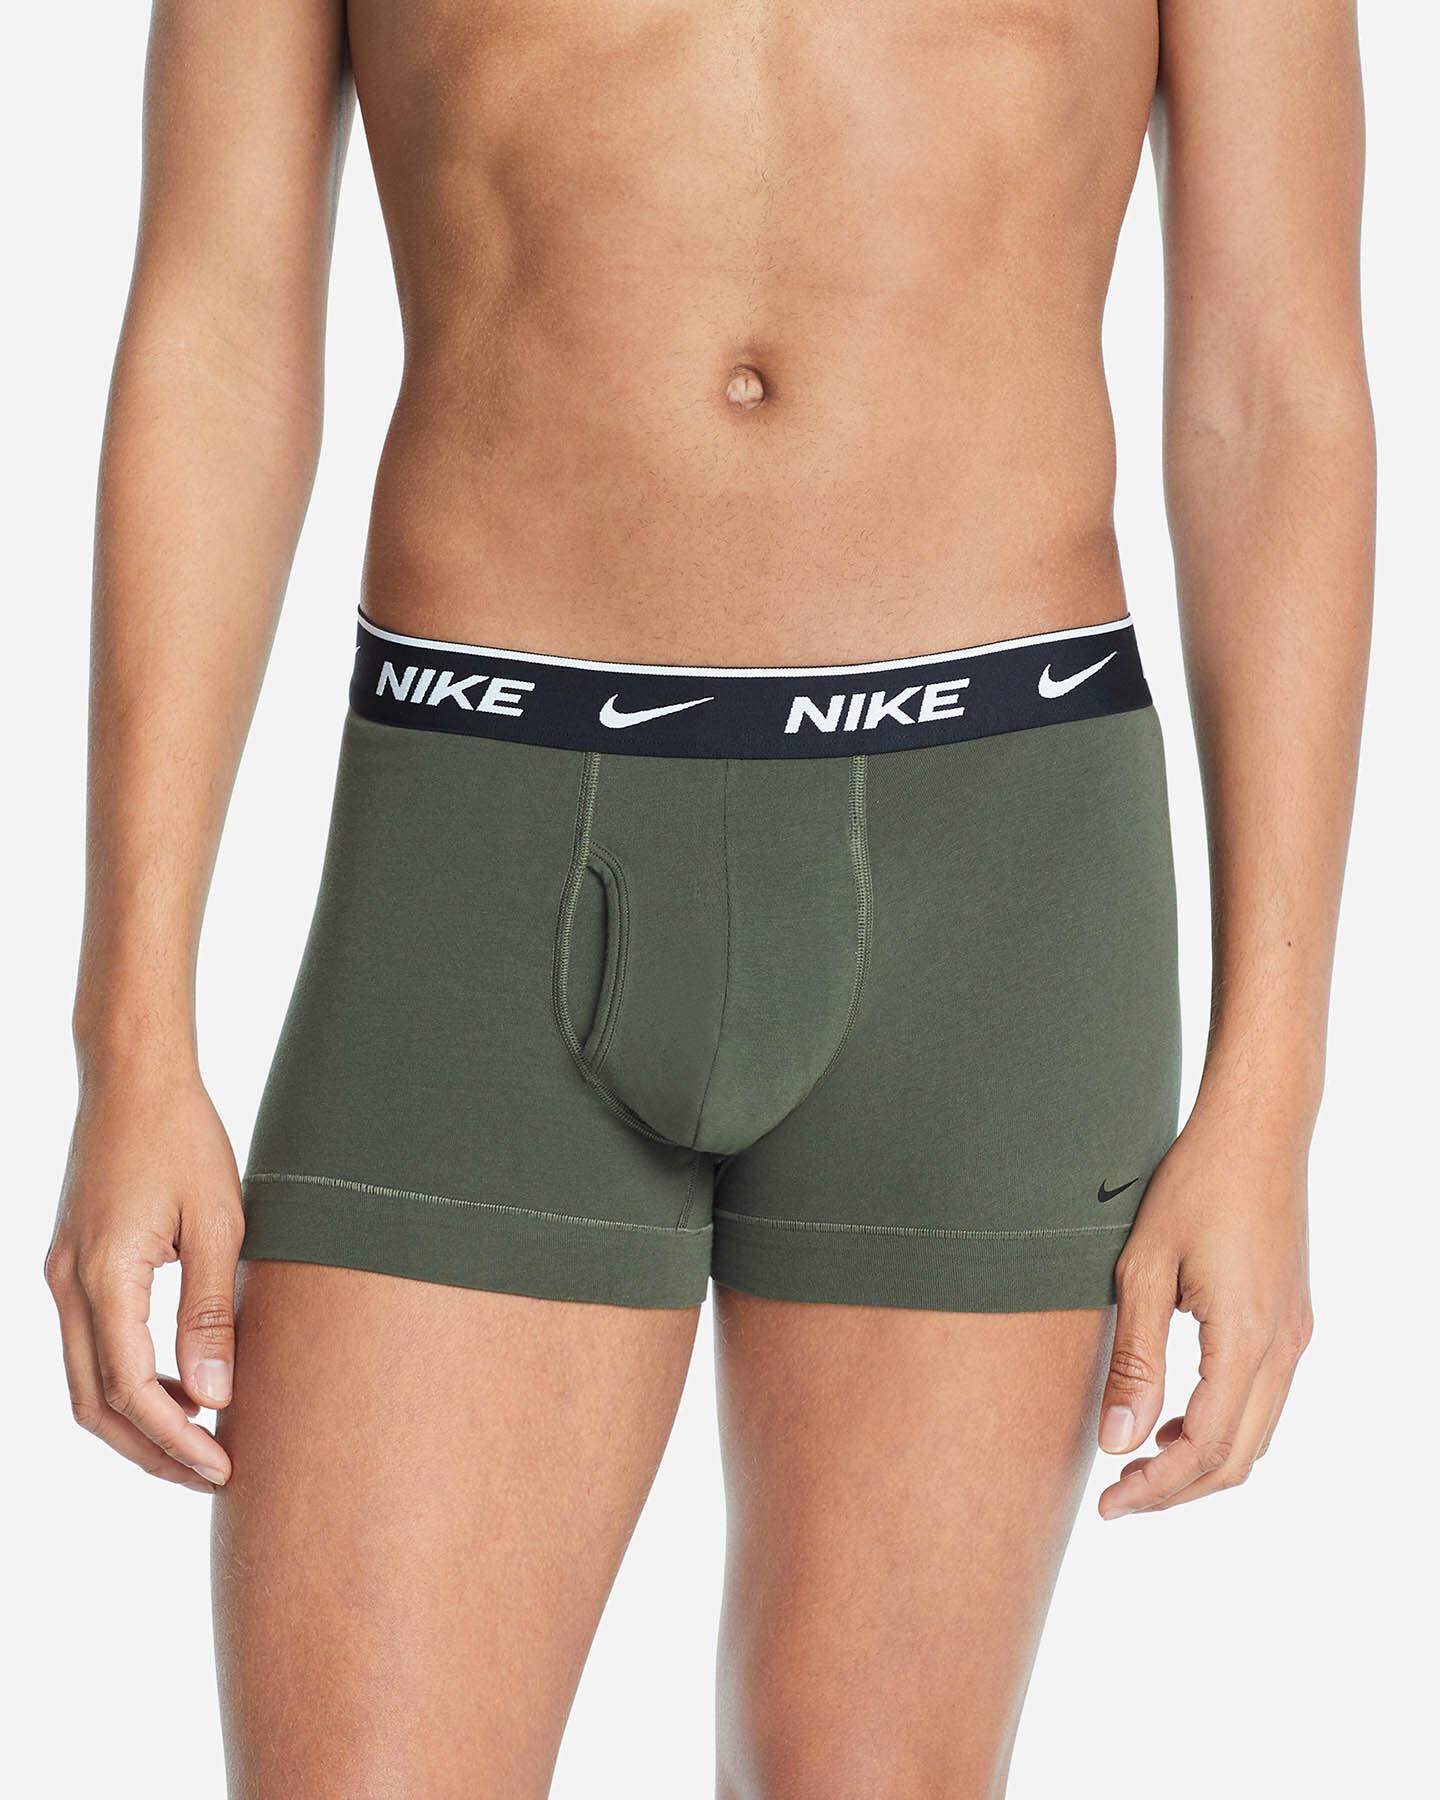  Intimo NIKE 2PACK BOXER EVERYDAY M S4099898|KUY|L scatto 1